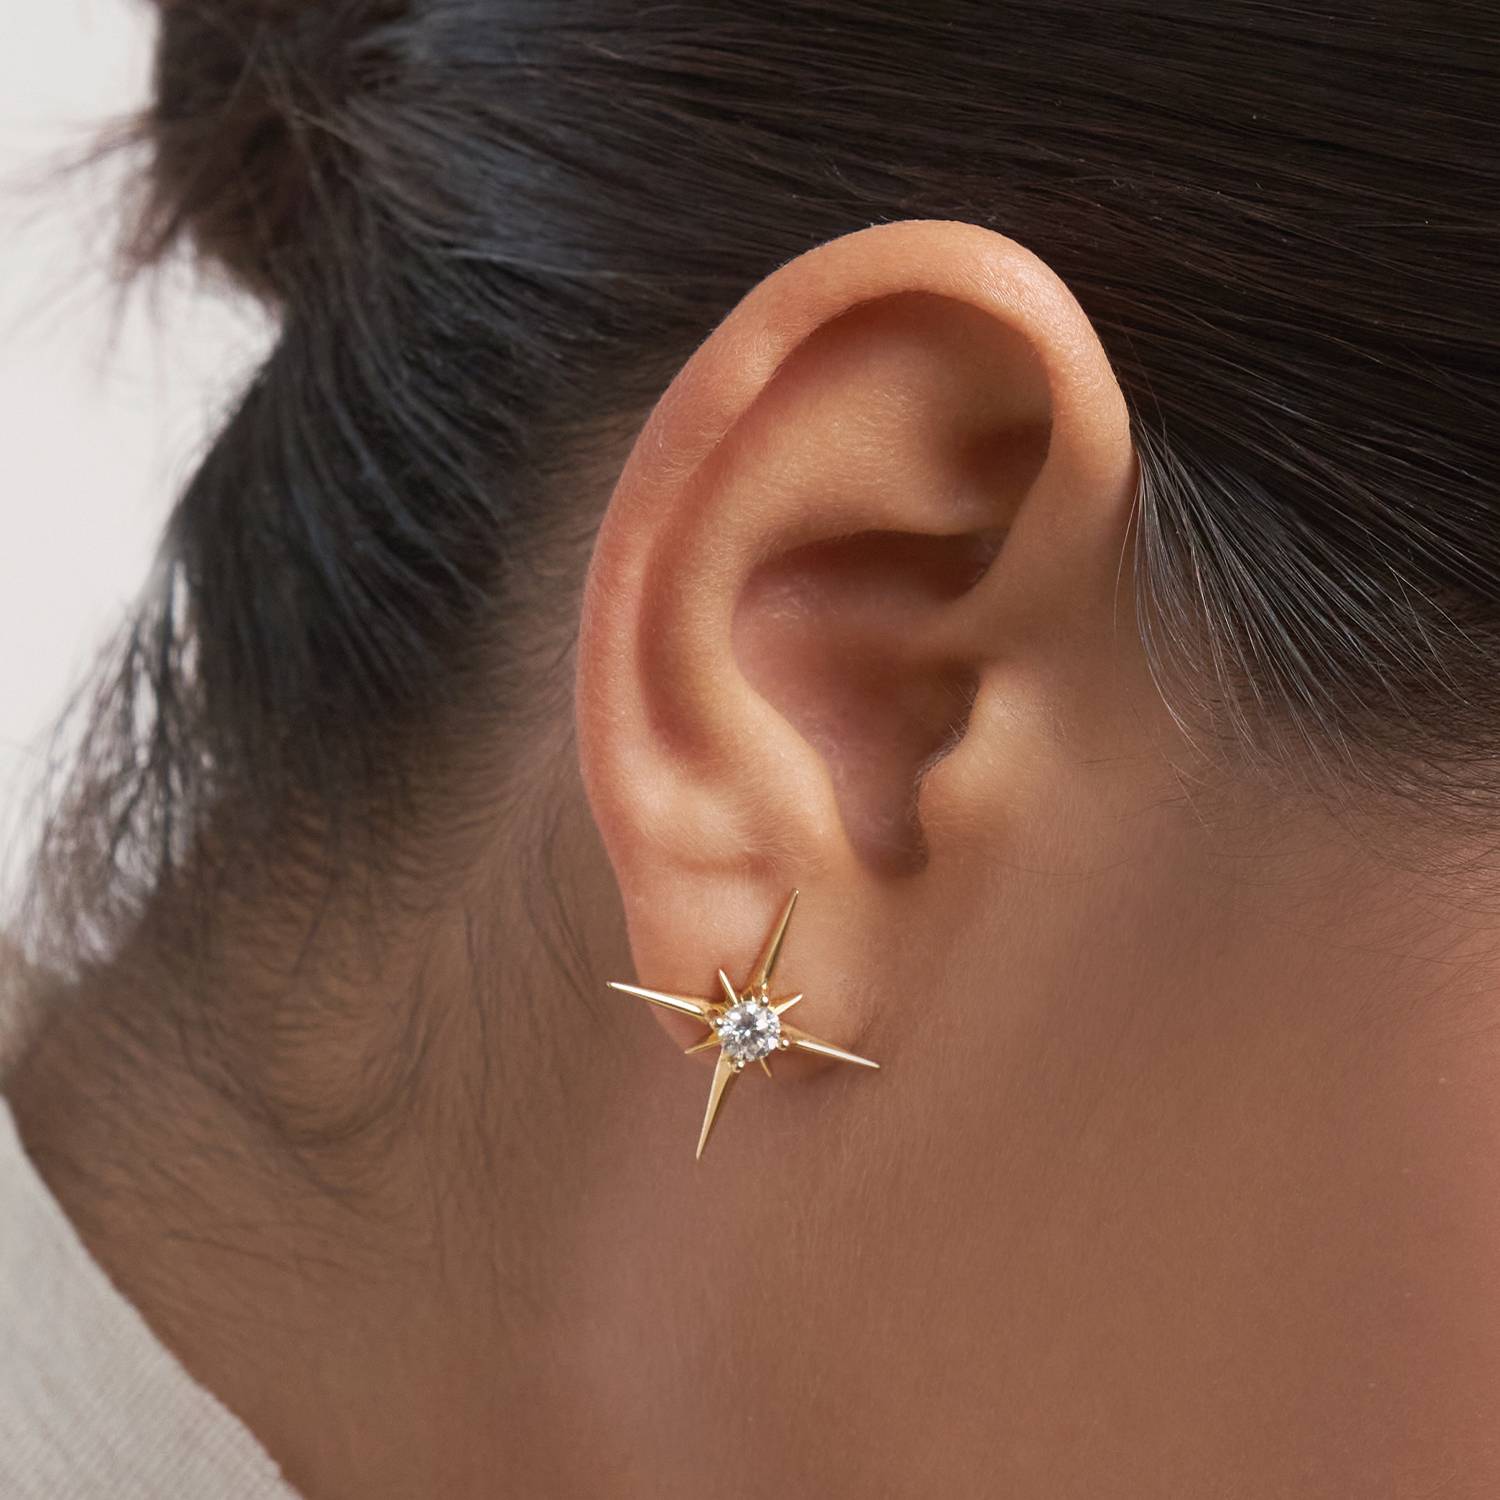 Northern Star Stud Earrings with 0.6 ct Diamond  - Gold Vermeil-2 product photo